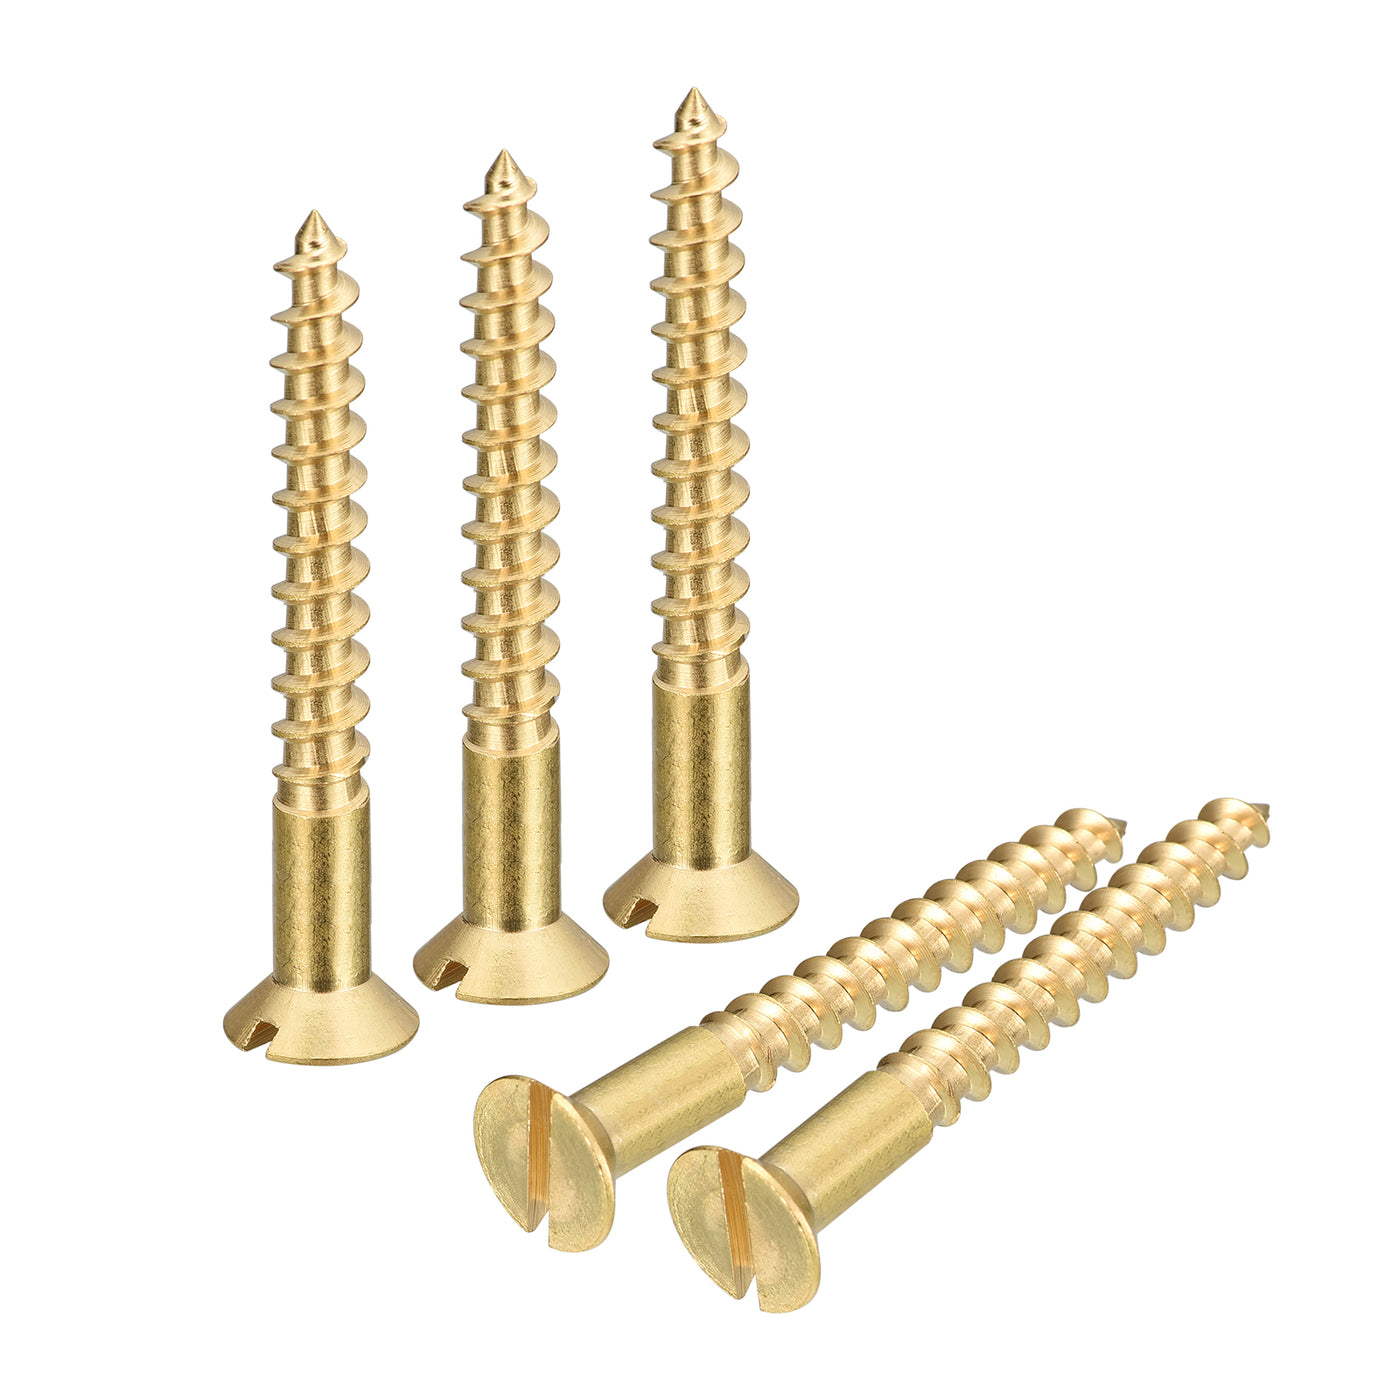 uxcell Uxcell 10Pcs M5 x 40mm Brass Slotted Drive Flat Head Wood Screws Self Tapping Screw